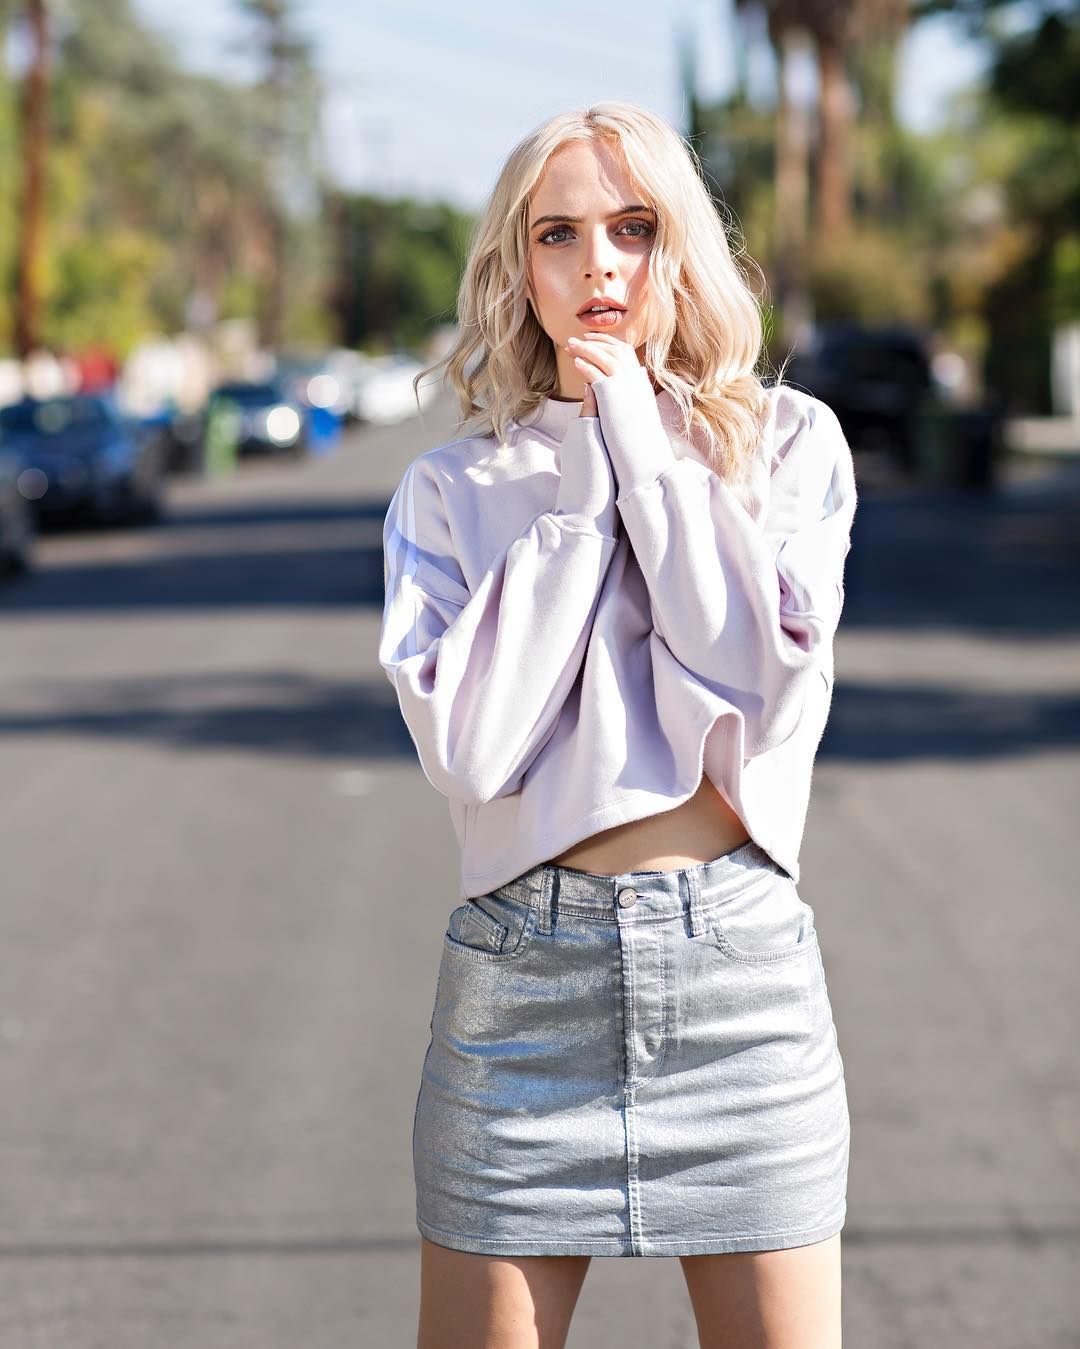 61 Sexy Madilyn Bailey Boobs Pictures Demonstrate That She Is A Gifted Individual 33